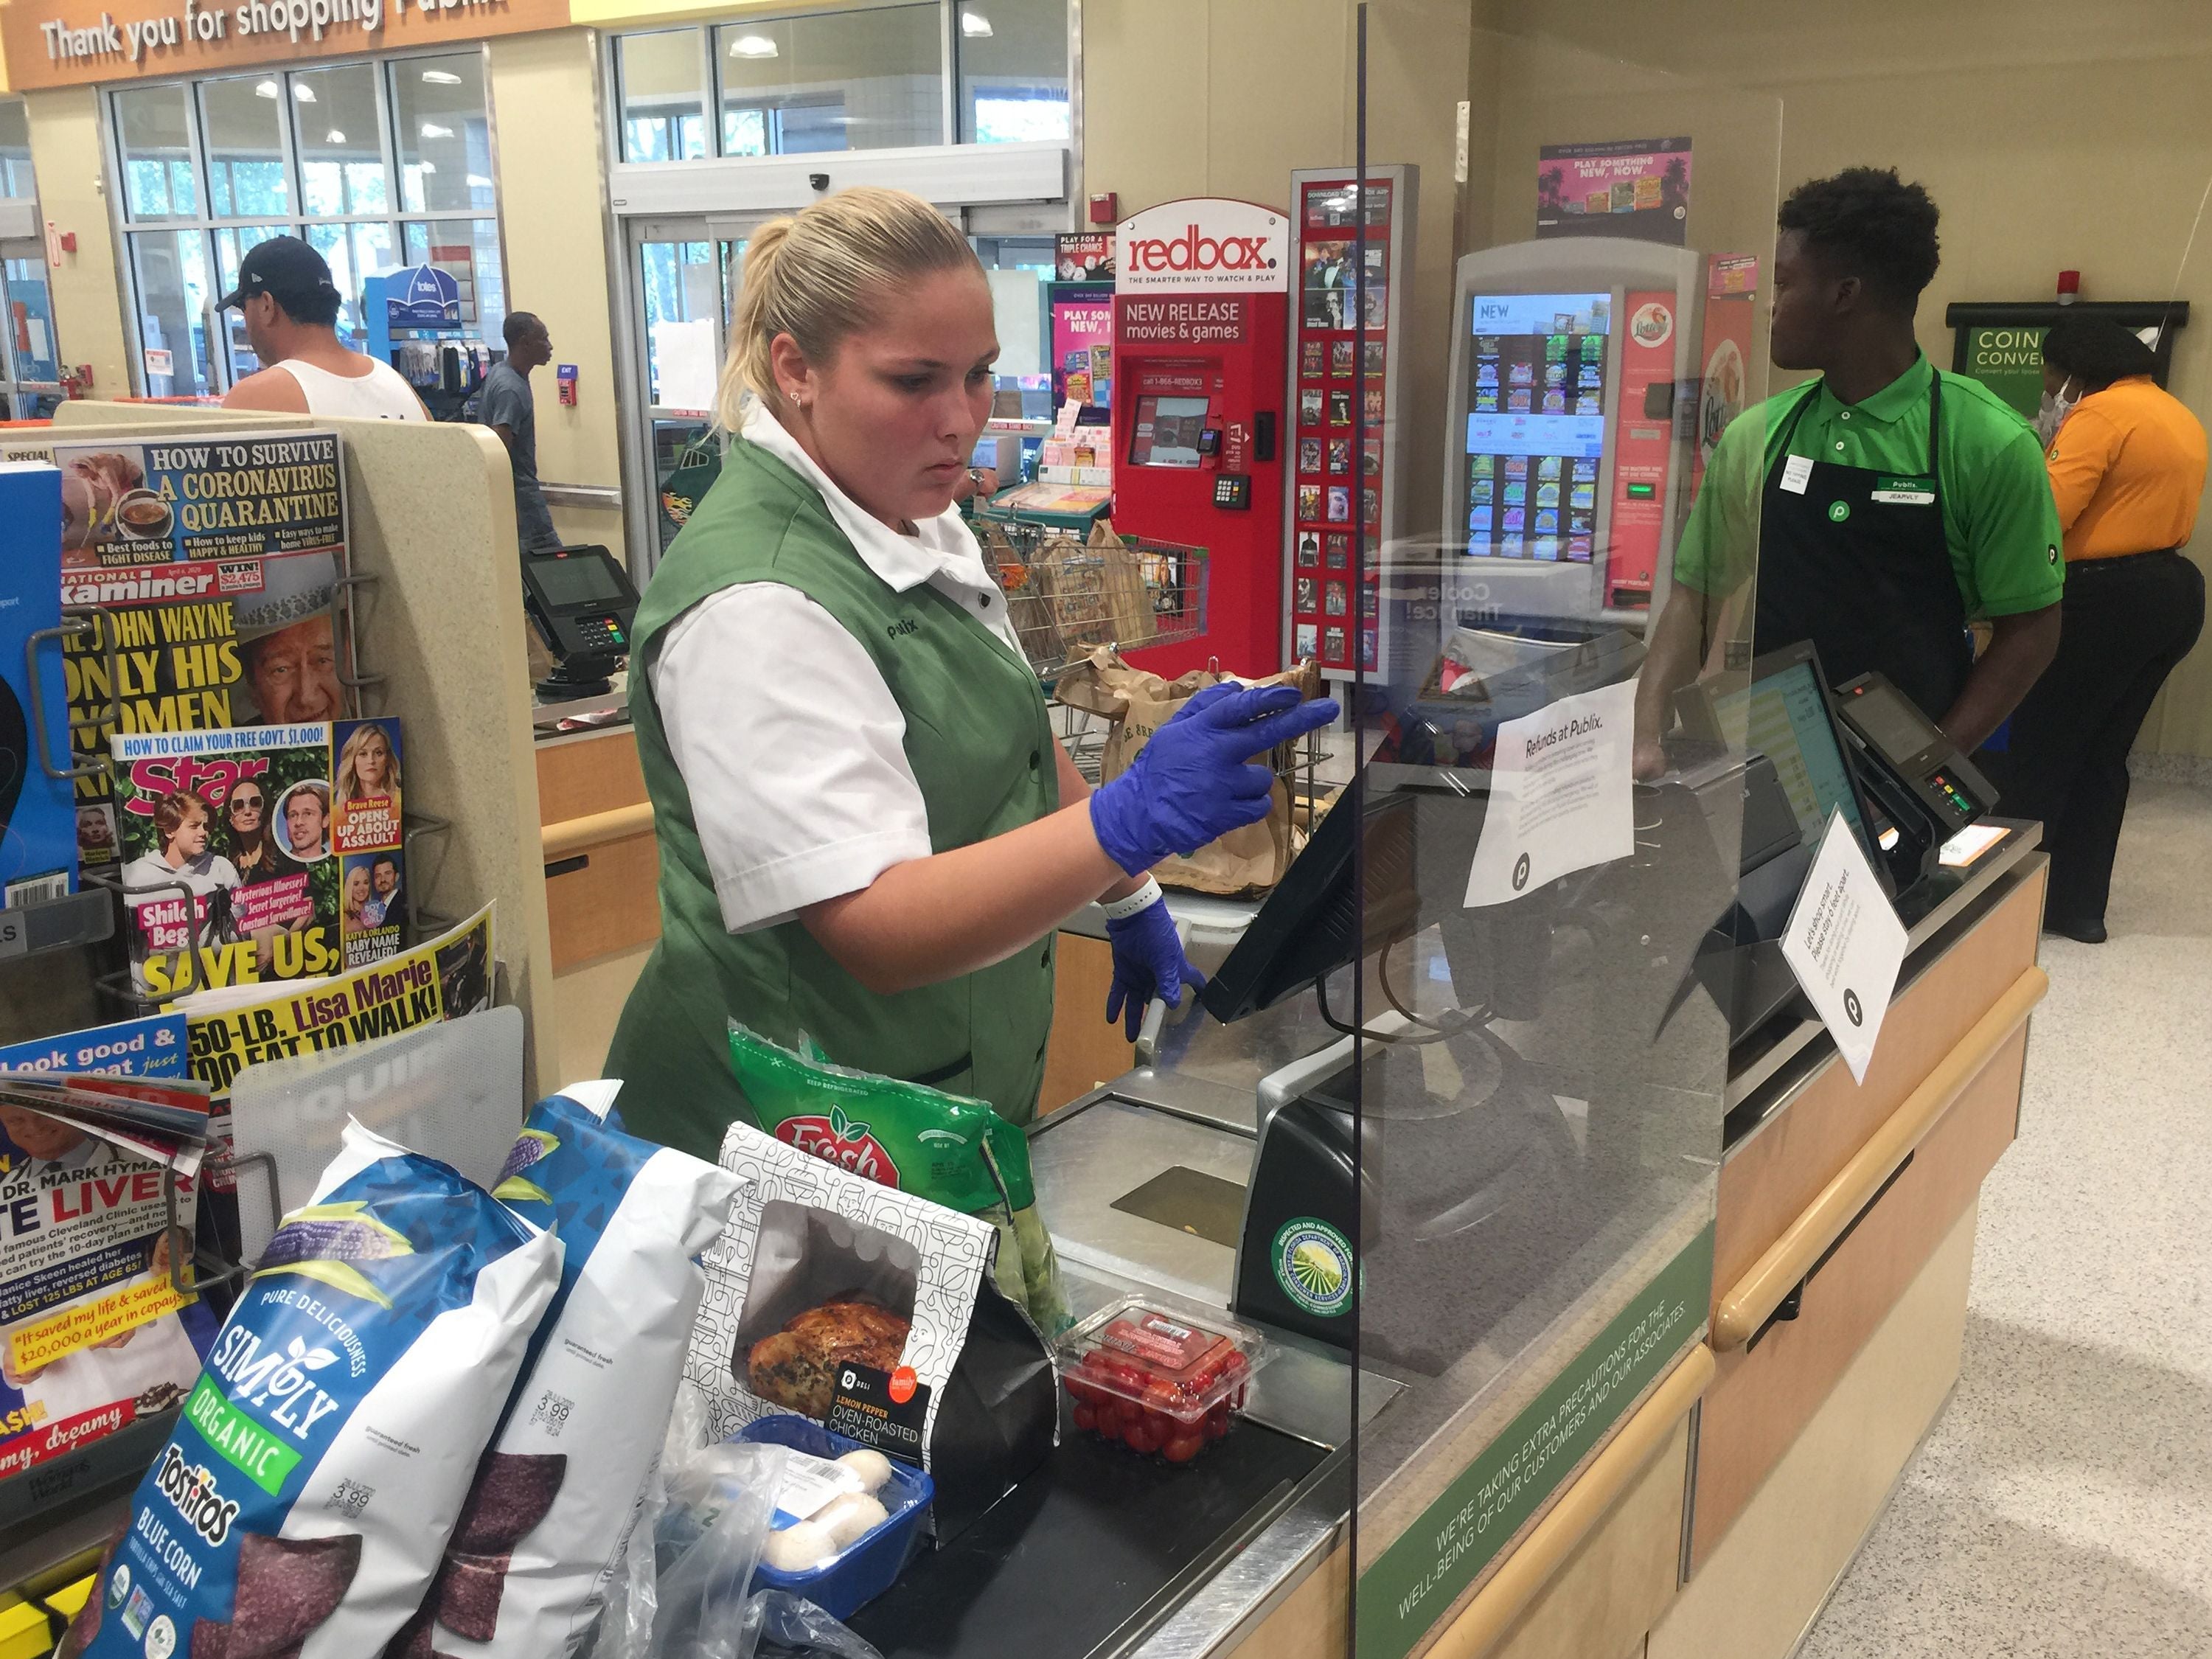 A Publix supermarket in Florida with Covid protections for staff